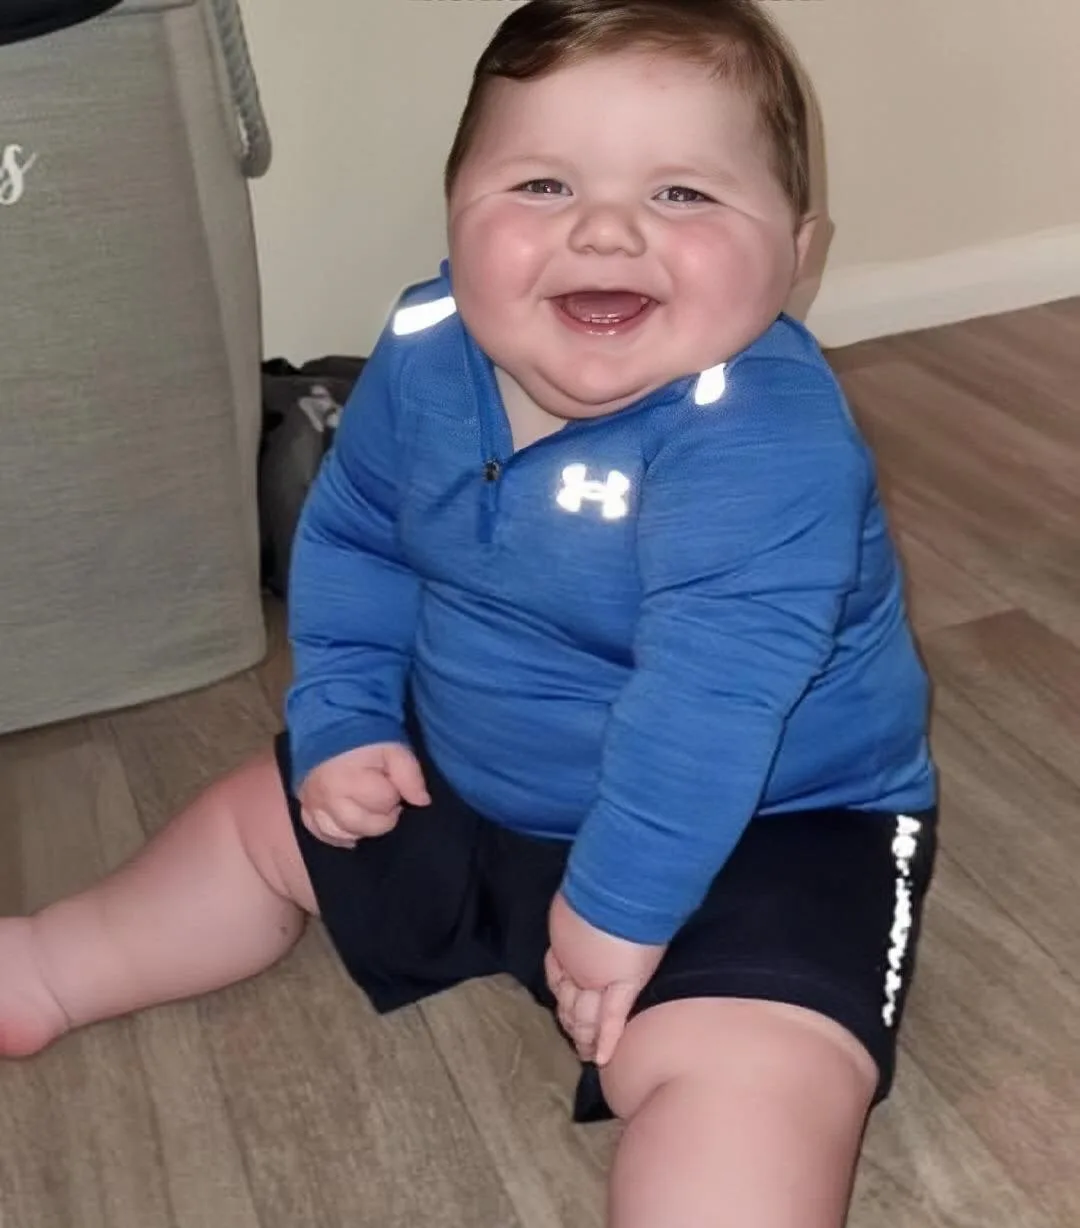 How astonishing! 11-month-old baby weighs as much as a 5-year-old due to unprecedented growth